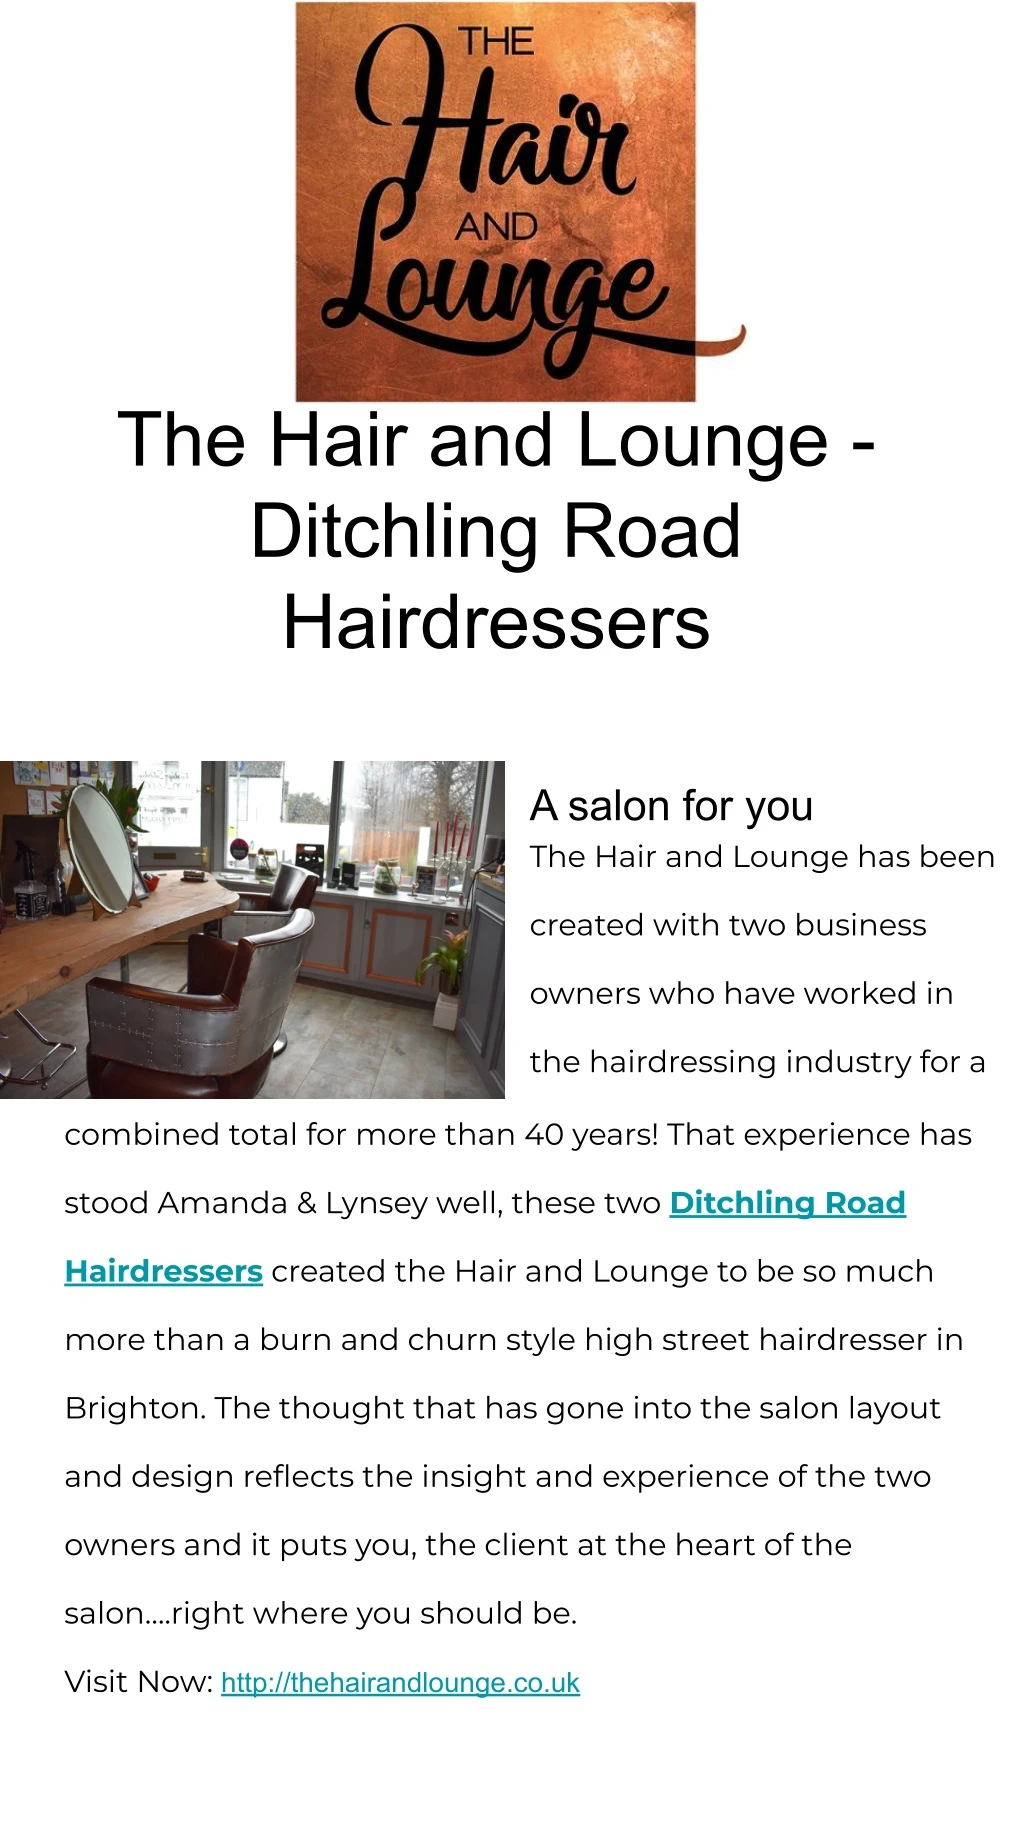 the hair and lounge ditchling road hairdressers